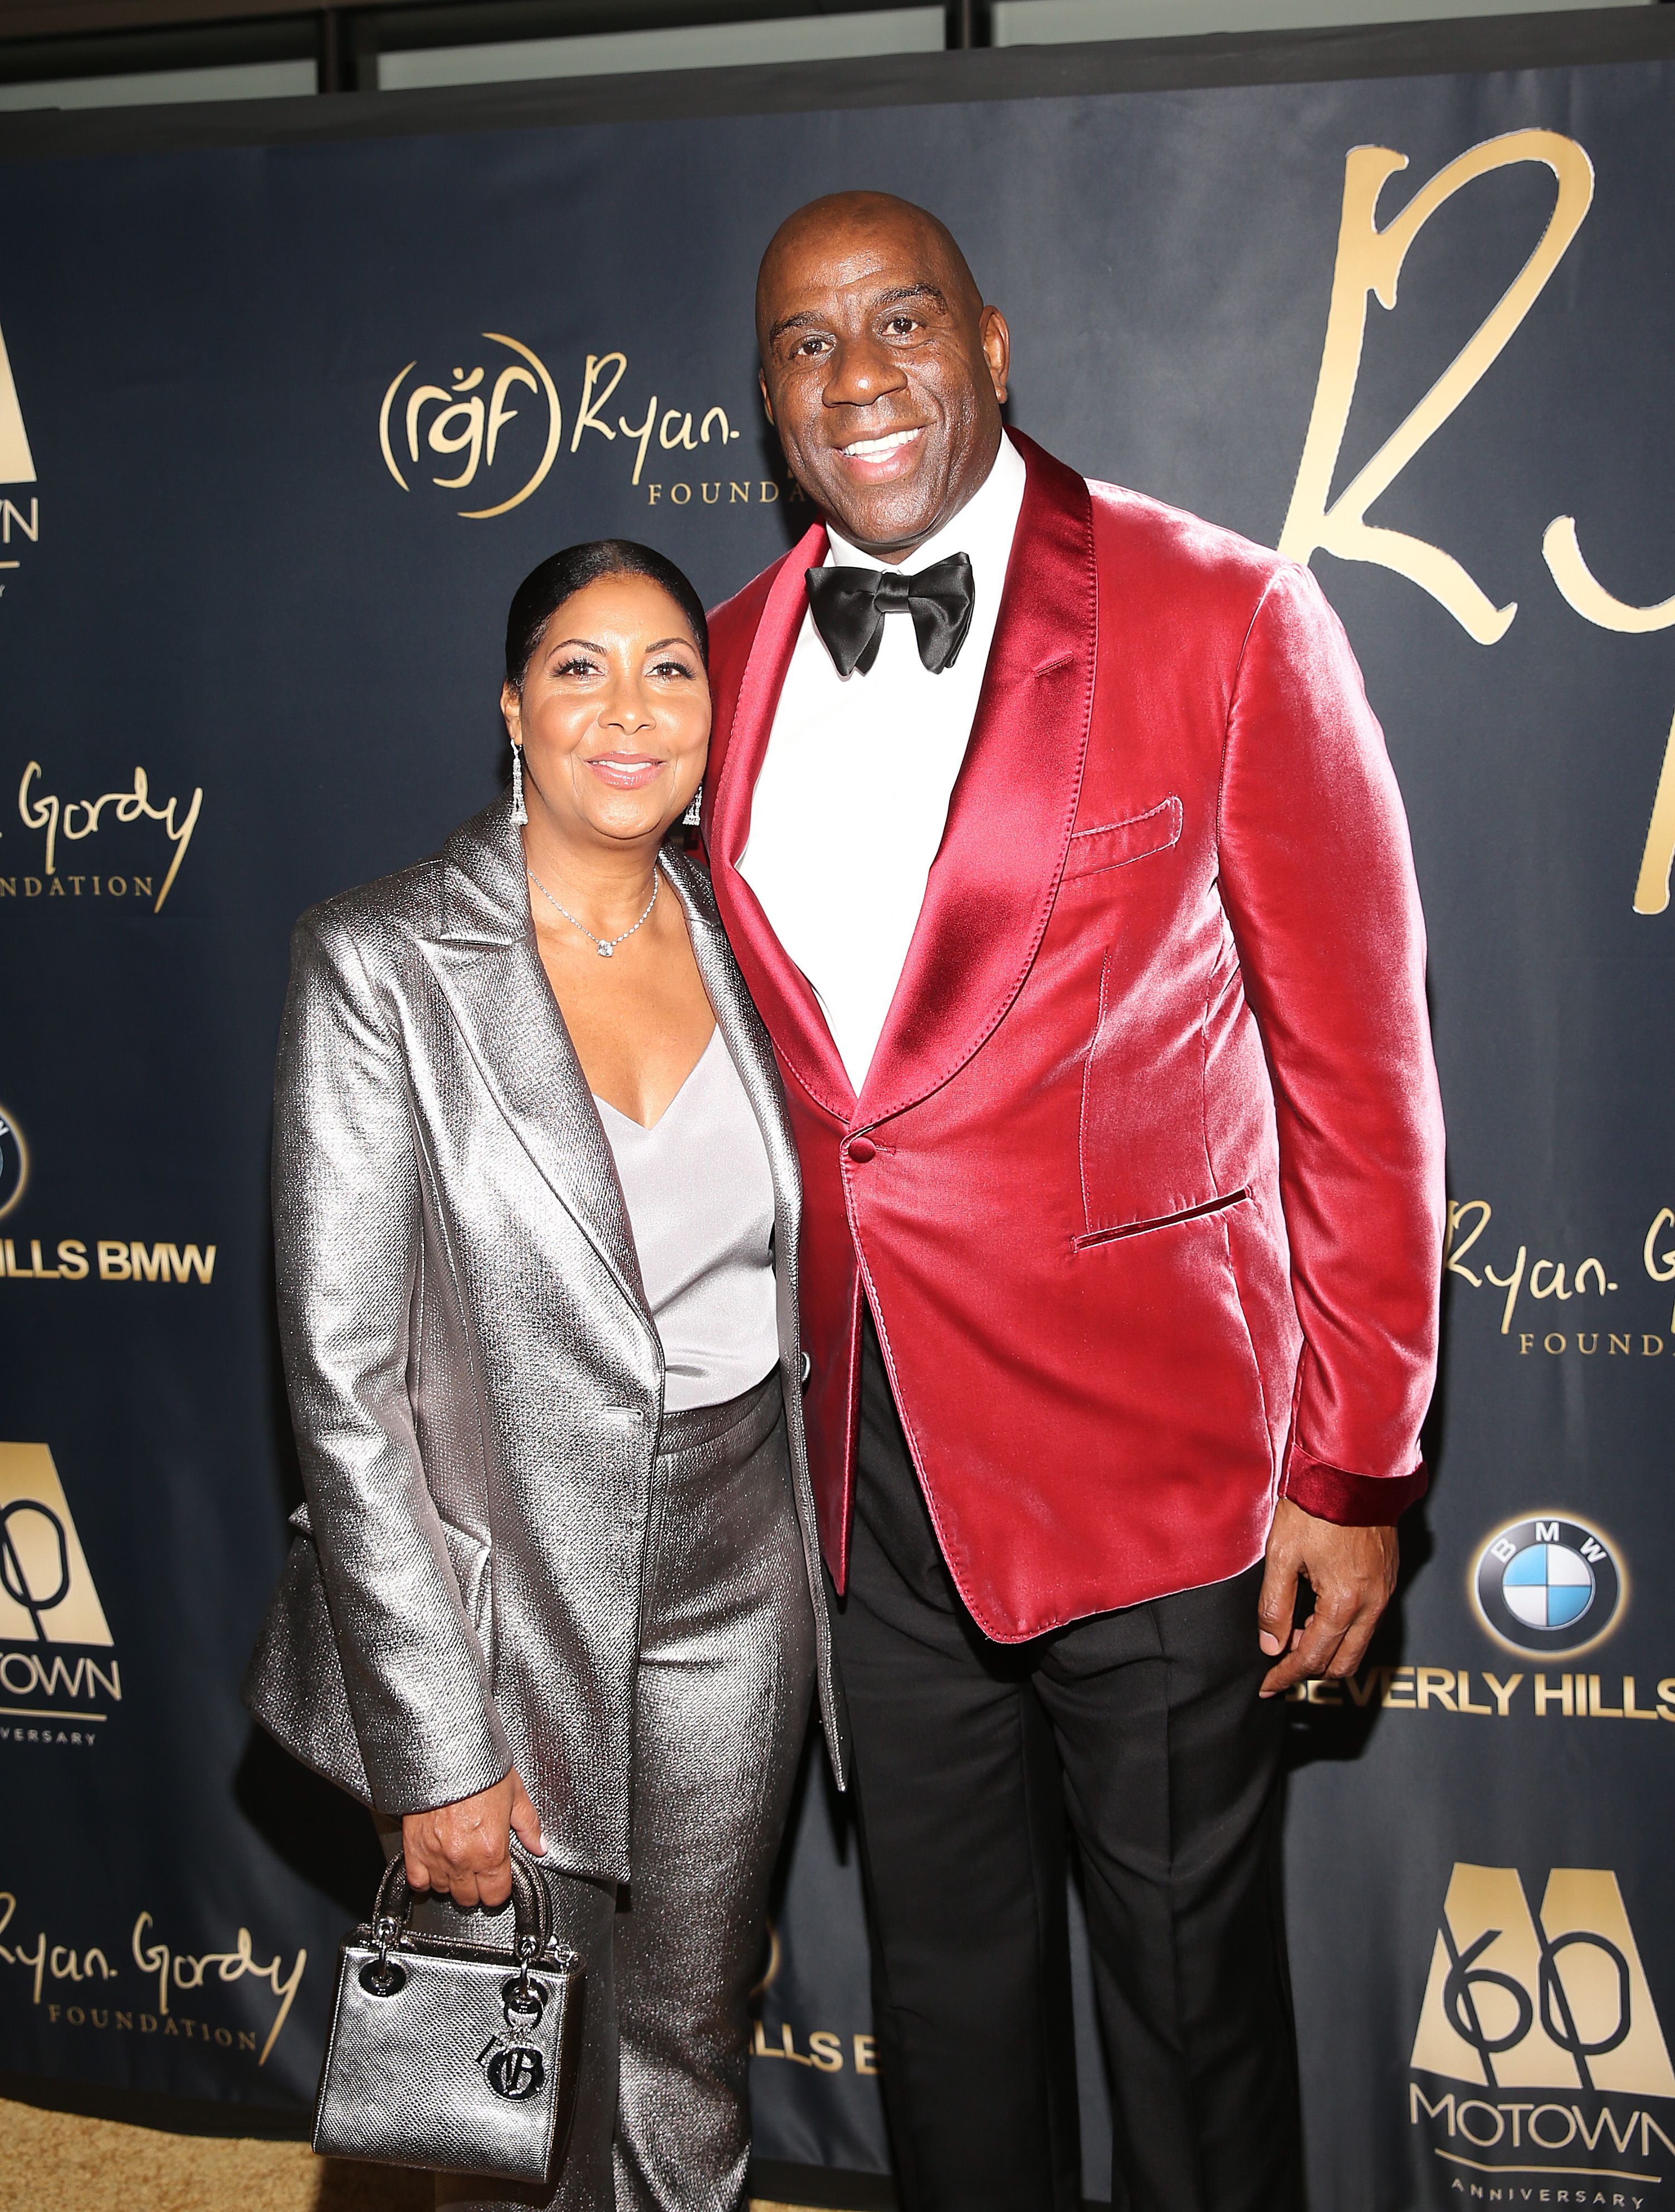 Cookie Johnson and Earvin "Magic" Johnson at the Ryan Gordy Foundation's "60 Years of Motown" celebration at the Waldorf Astoria Beverly Hills on November 11, 2019. | Source: Getty Images